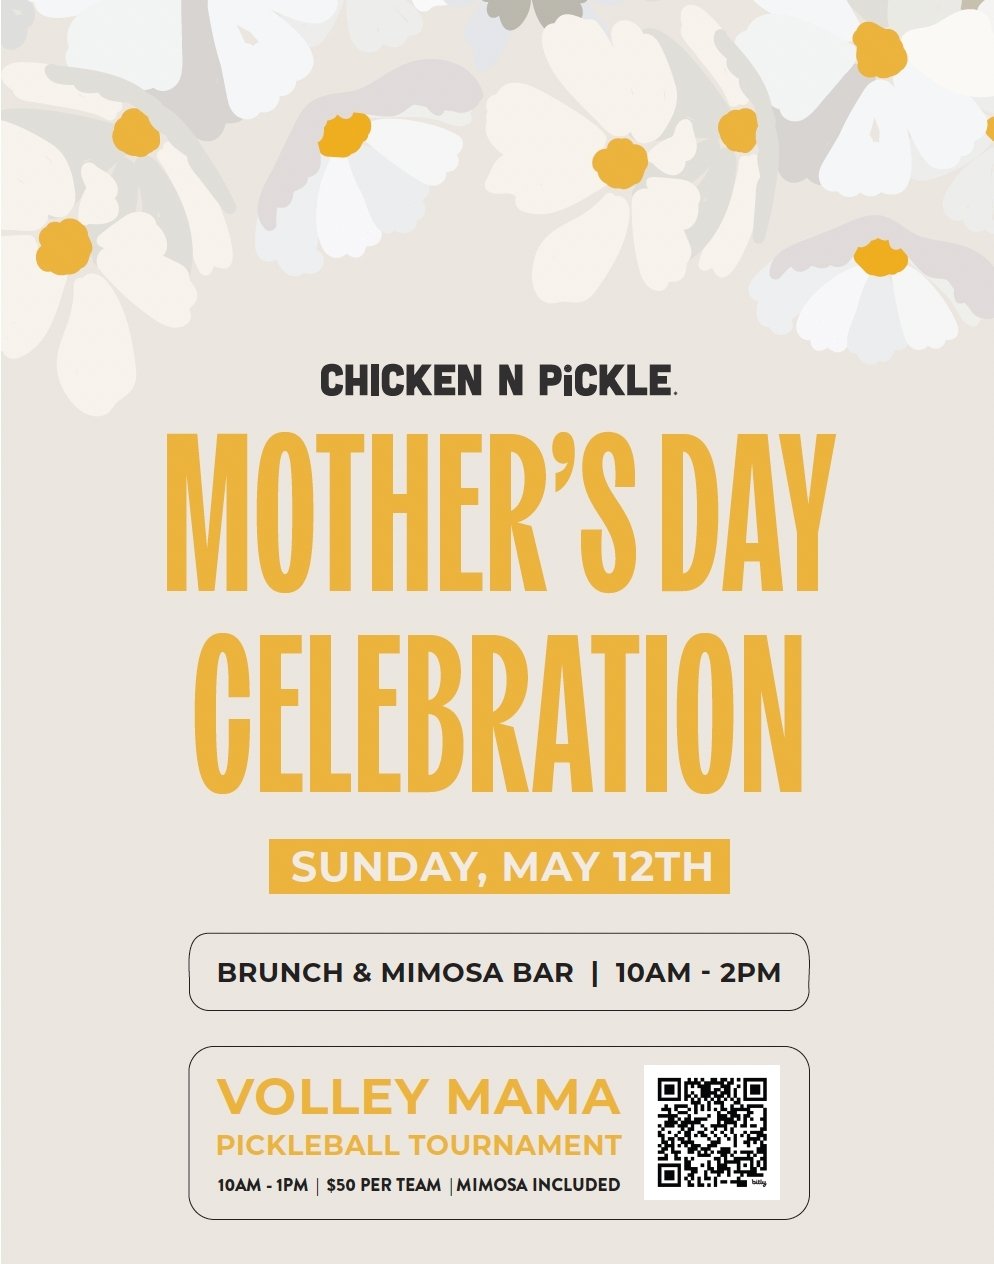 SAVE THE DATE! 

Chicken N Pickle is one of Christina&rsquo;s favorite places to go with her family. So that is why it is so AMAZING ladies that Sweet Streams Lavender will be at the Overland Park Chicken N Pickle location for Mother's Day. Join us f